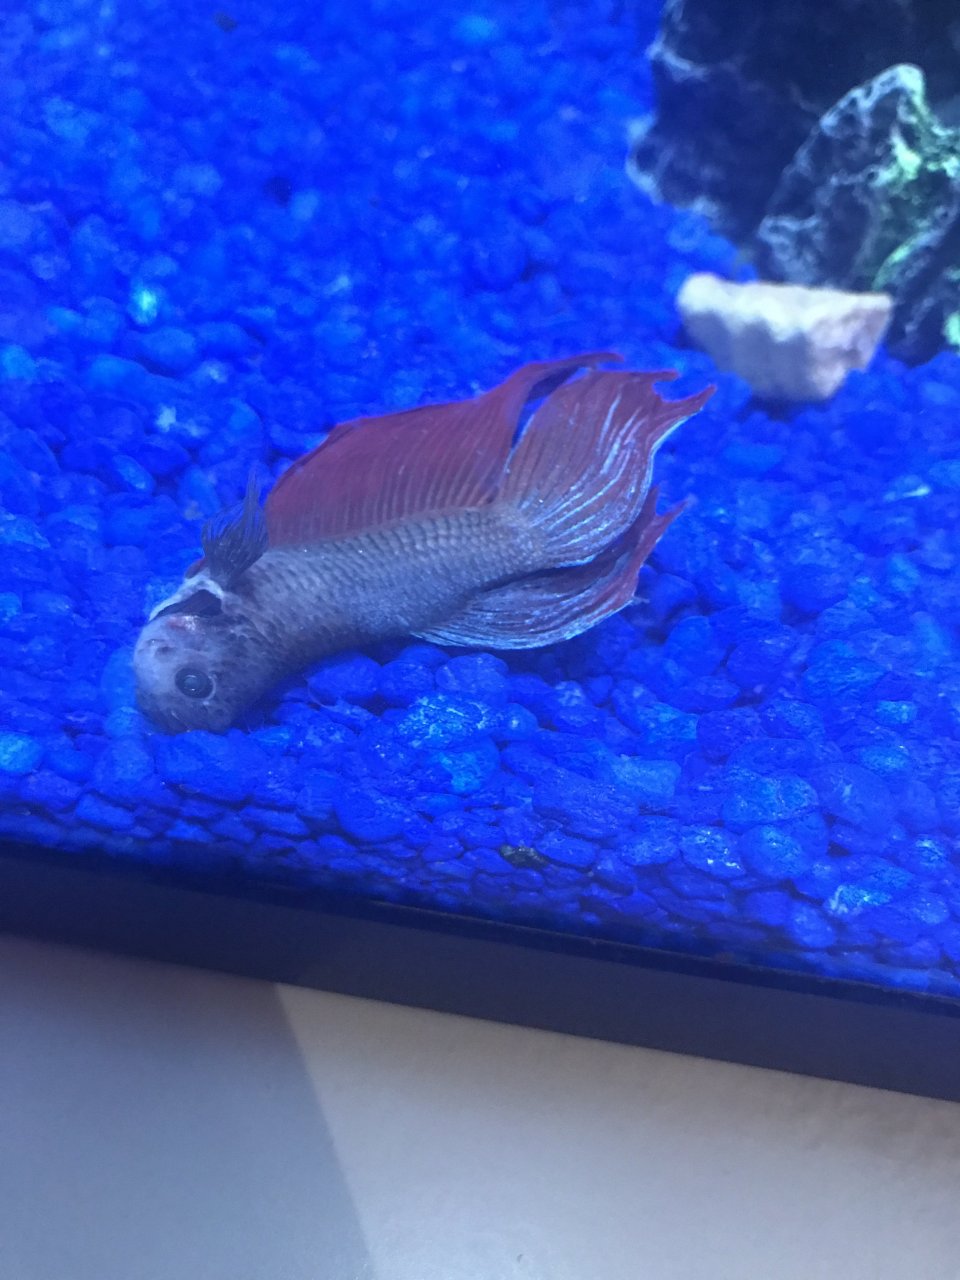 My Betta Died. Can Anyone Determine Why? (Warning Photos Of A